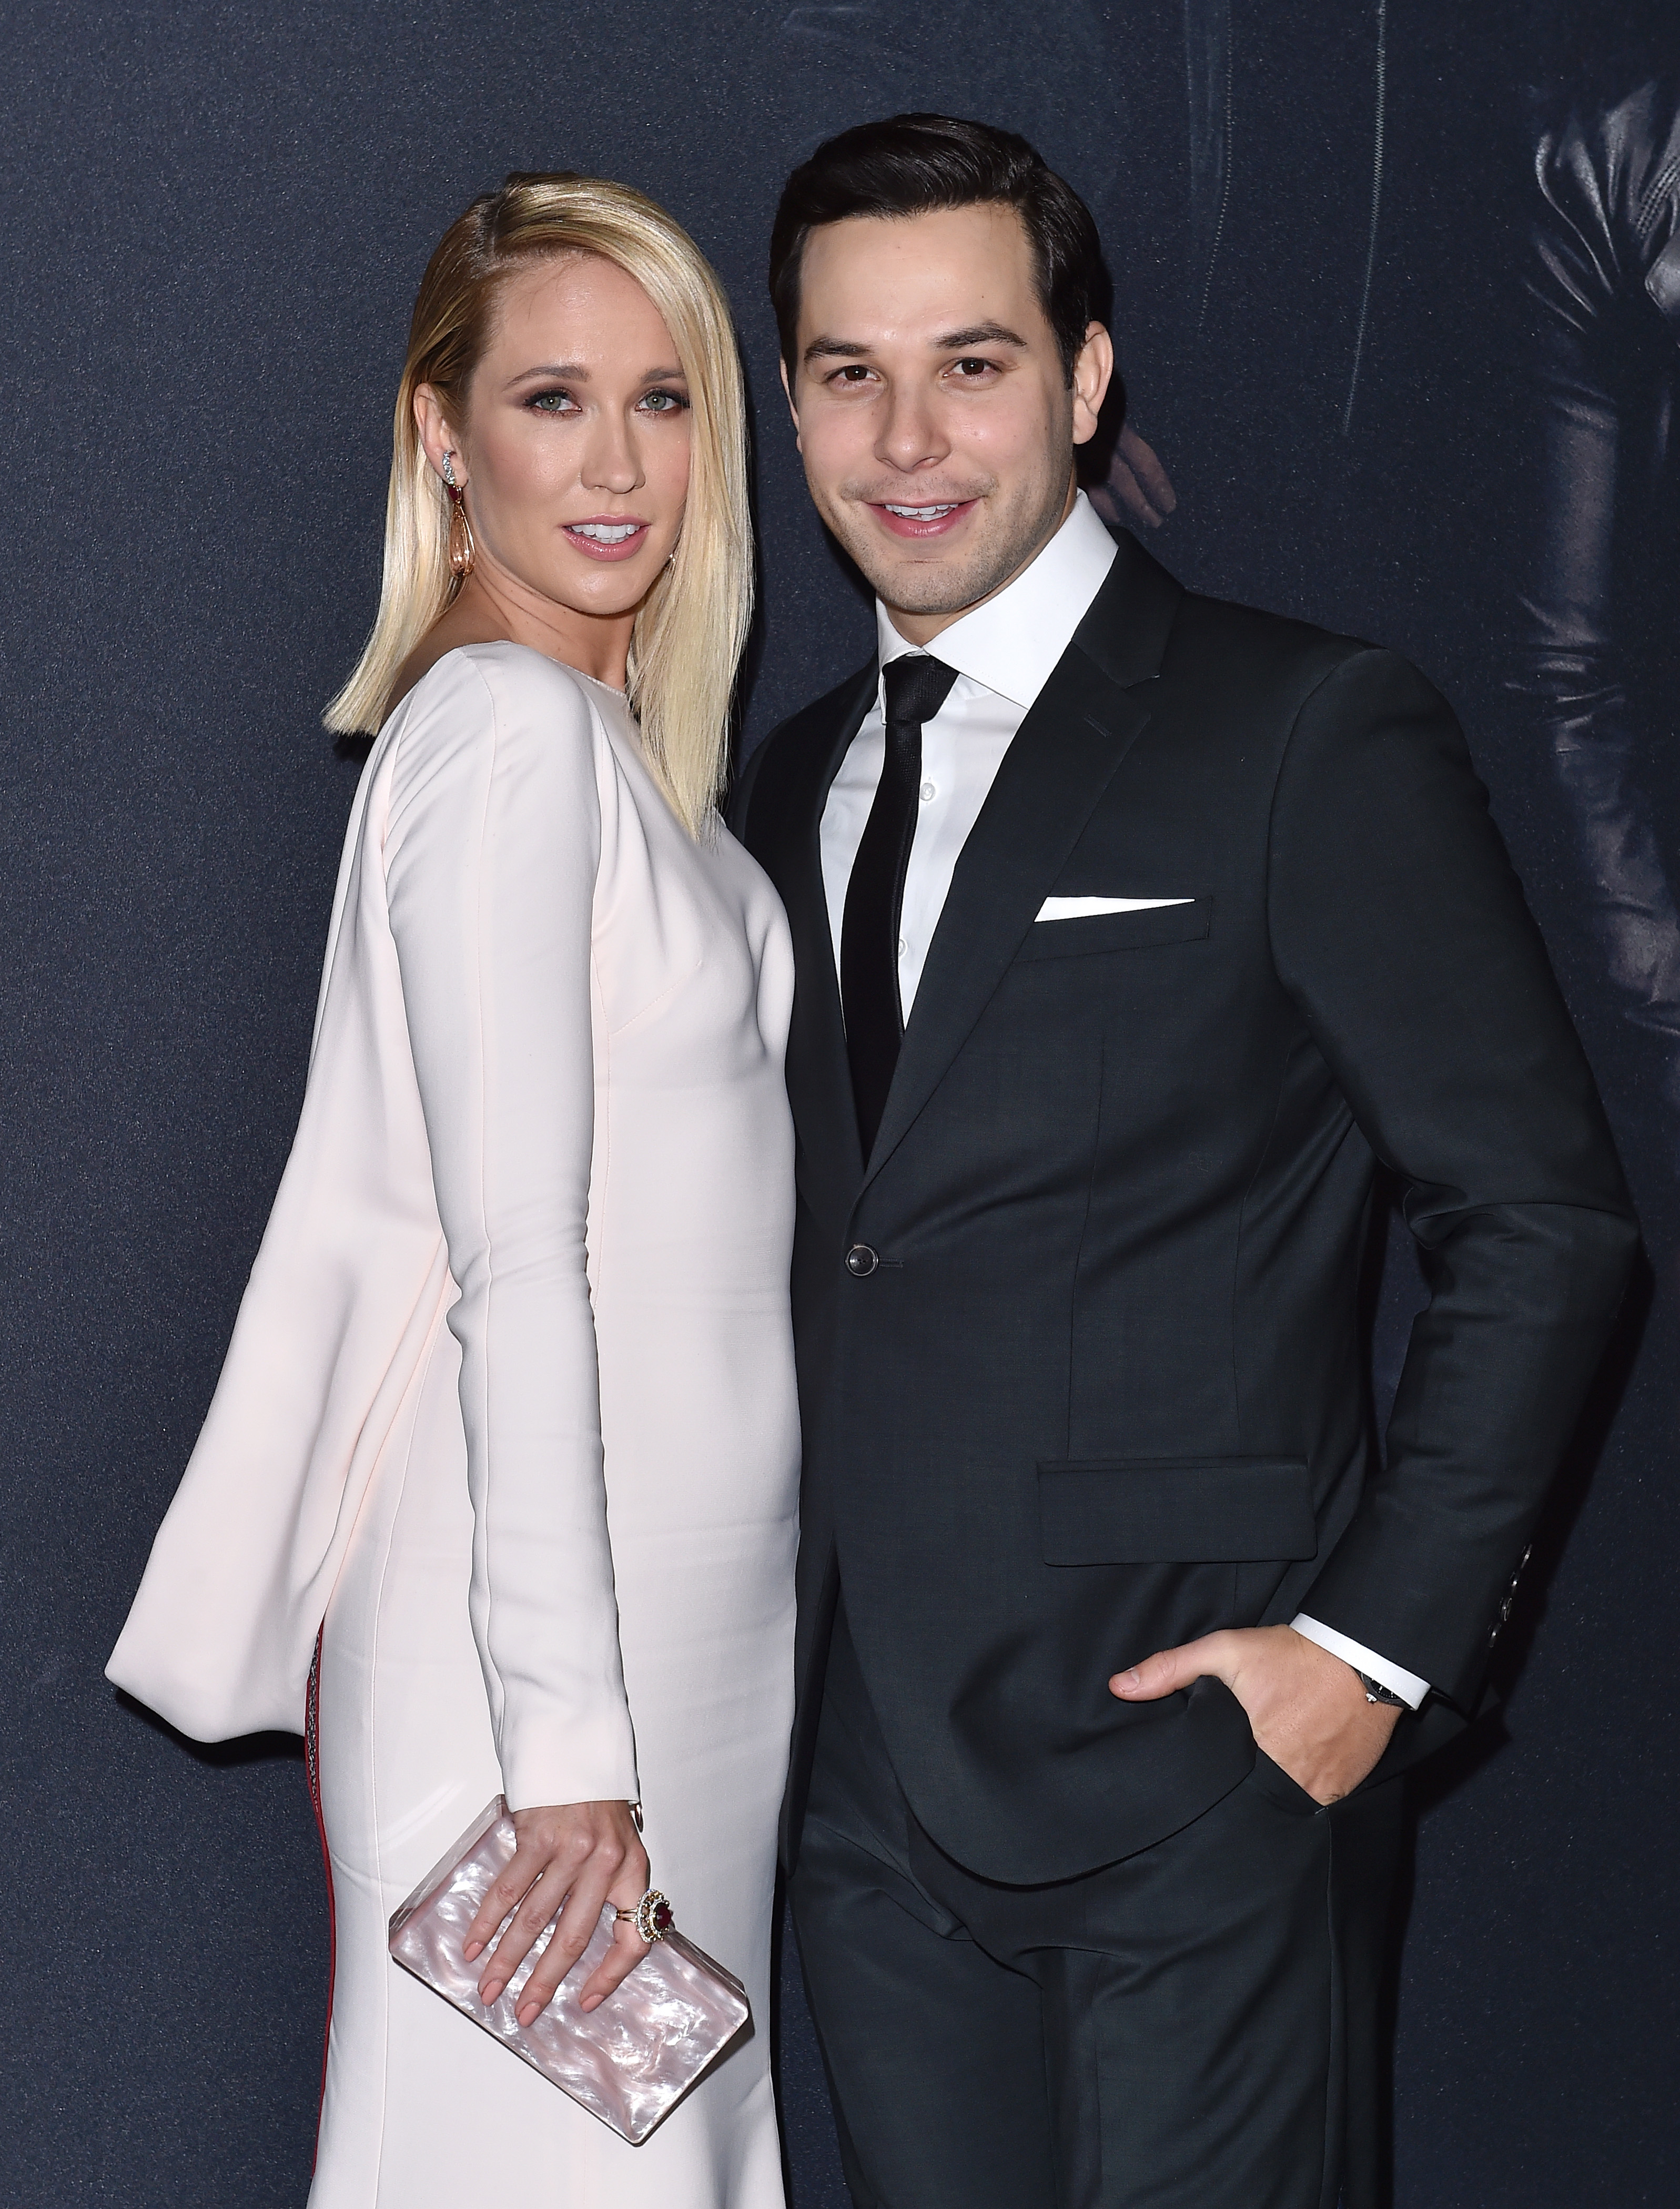 Anna Camp and Skylar Astin at the premiere of Pitch Perfect 3